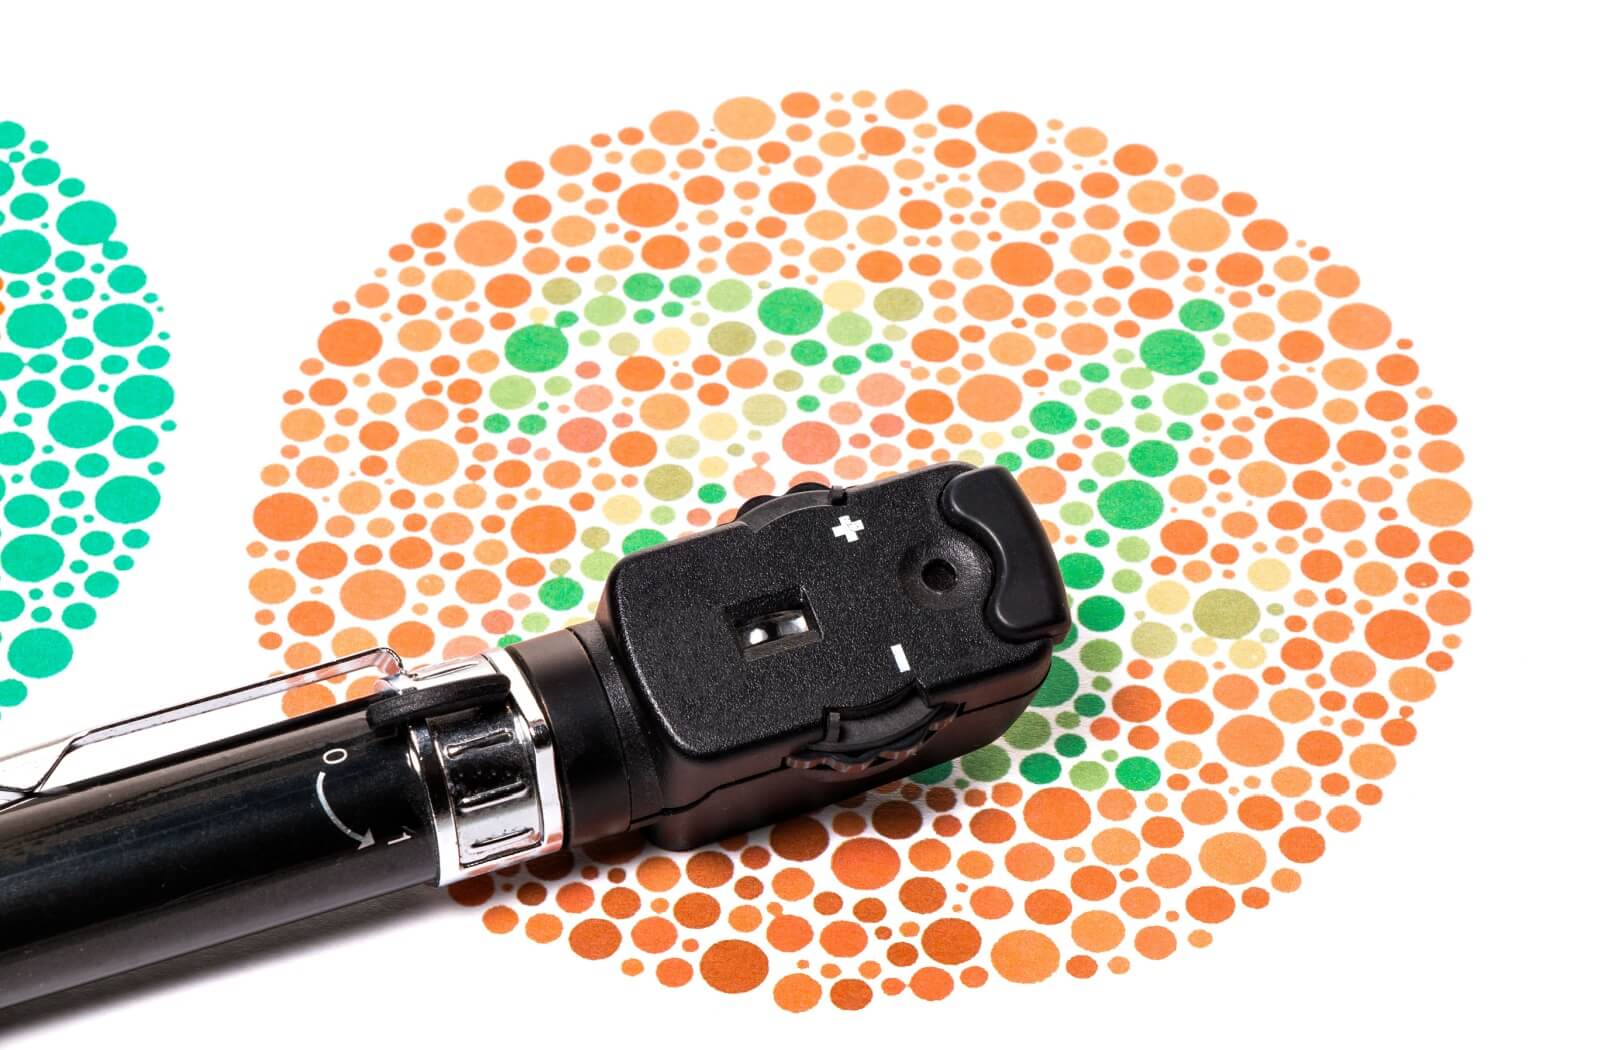 A close-up of an phthalmoscope is on a Ishihara color vision test chart.